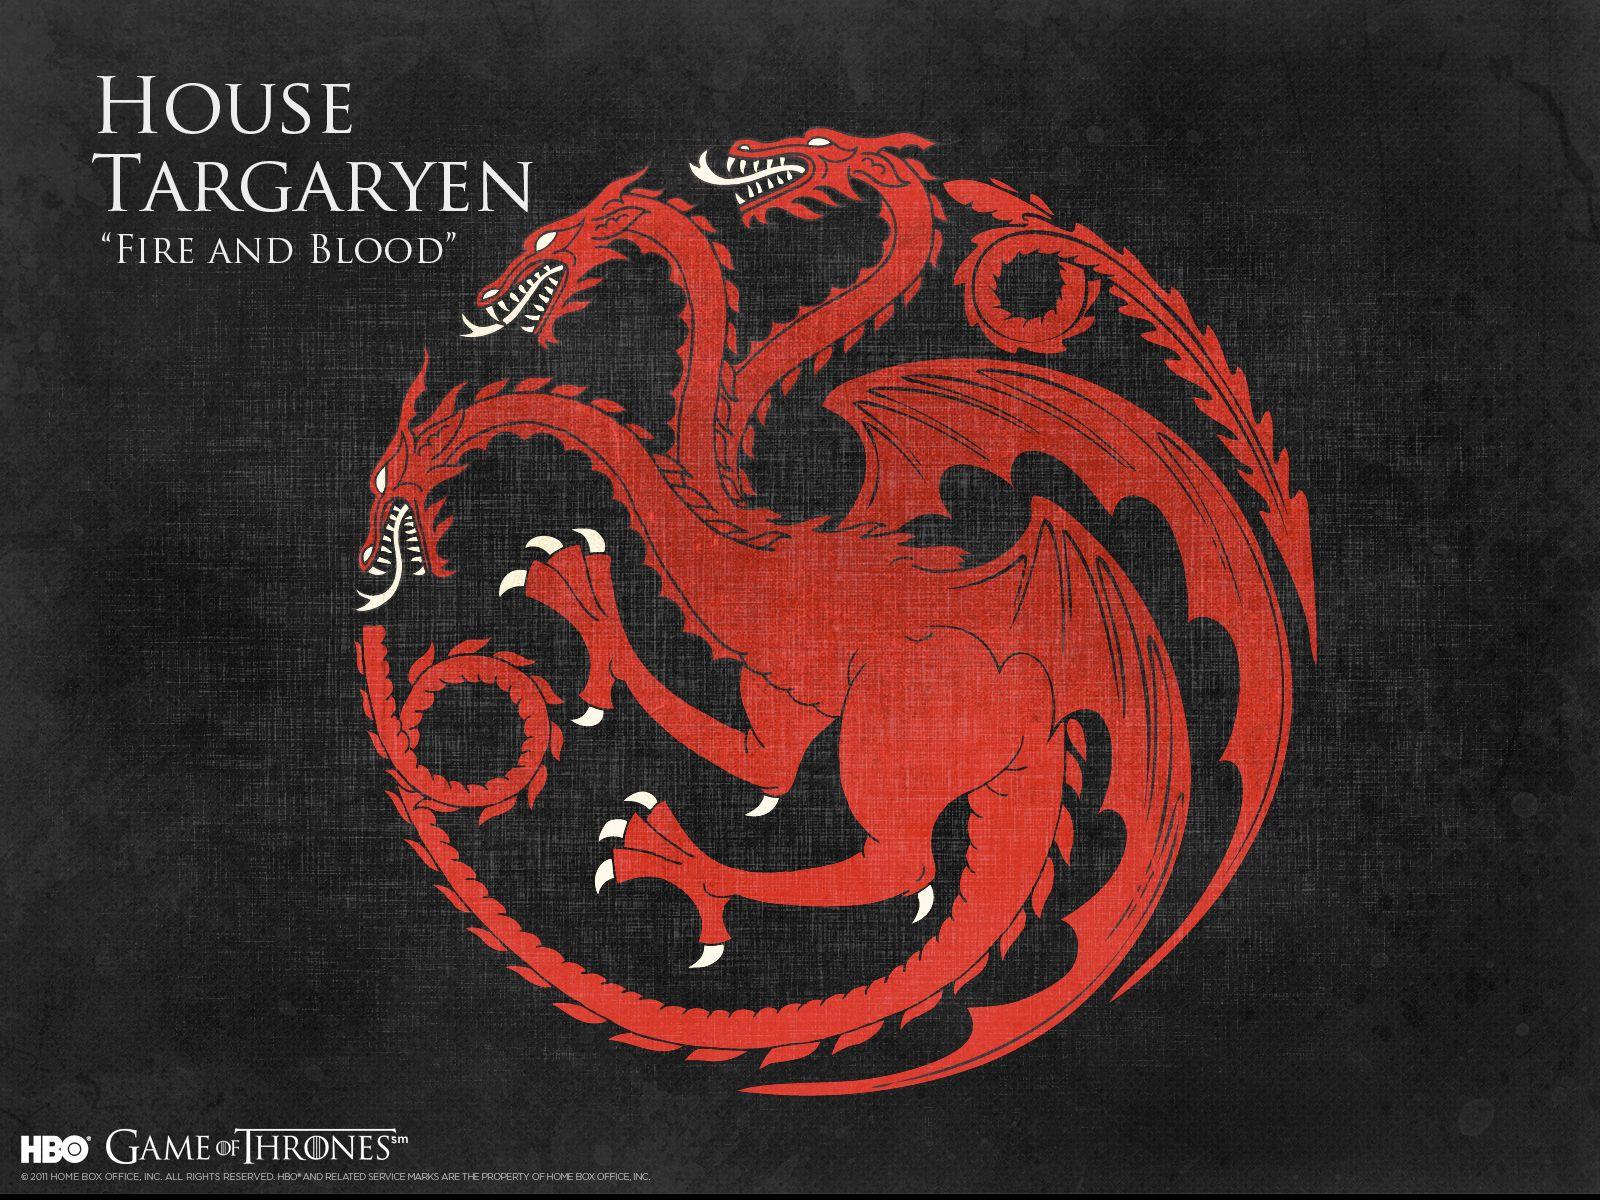 Game of Thrones Banner Wallpapers - Top Free Game of Thrones Banner ...